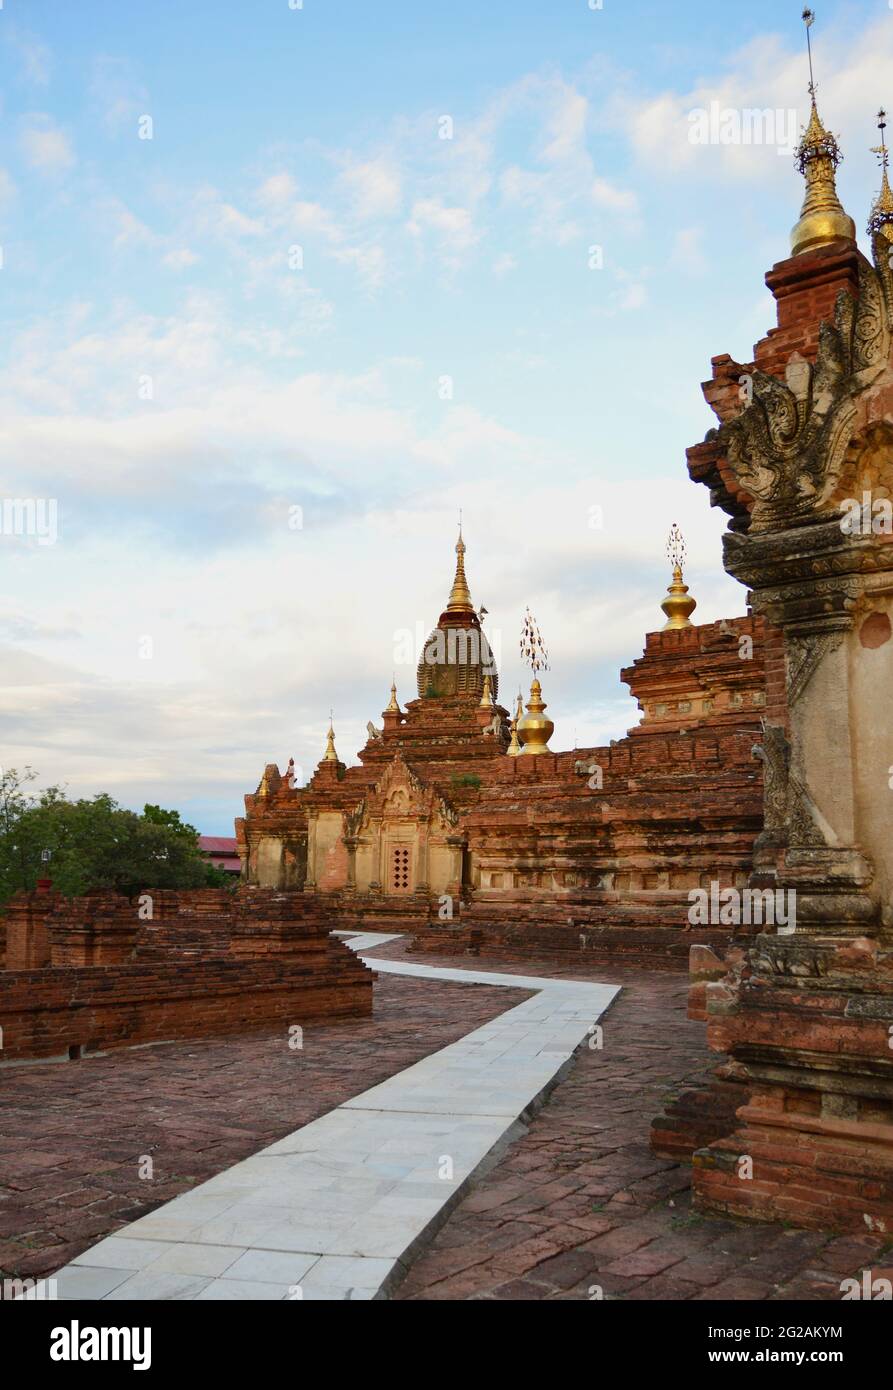 Exterior of the stupas in the complex of Bagan Archaeological Zone Stock Photo